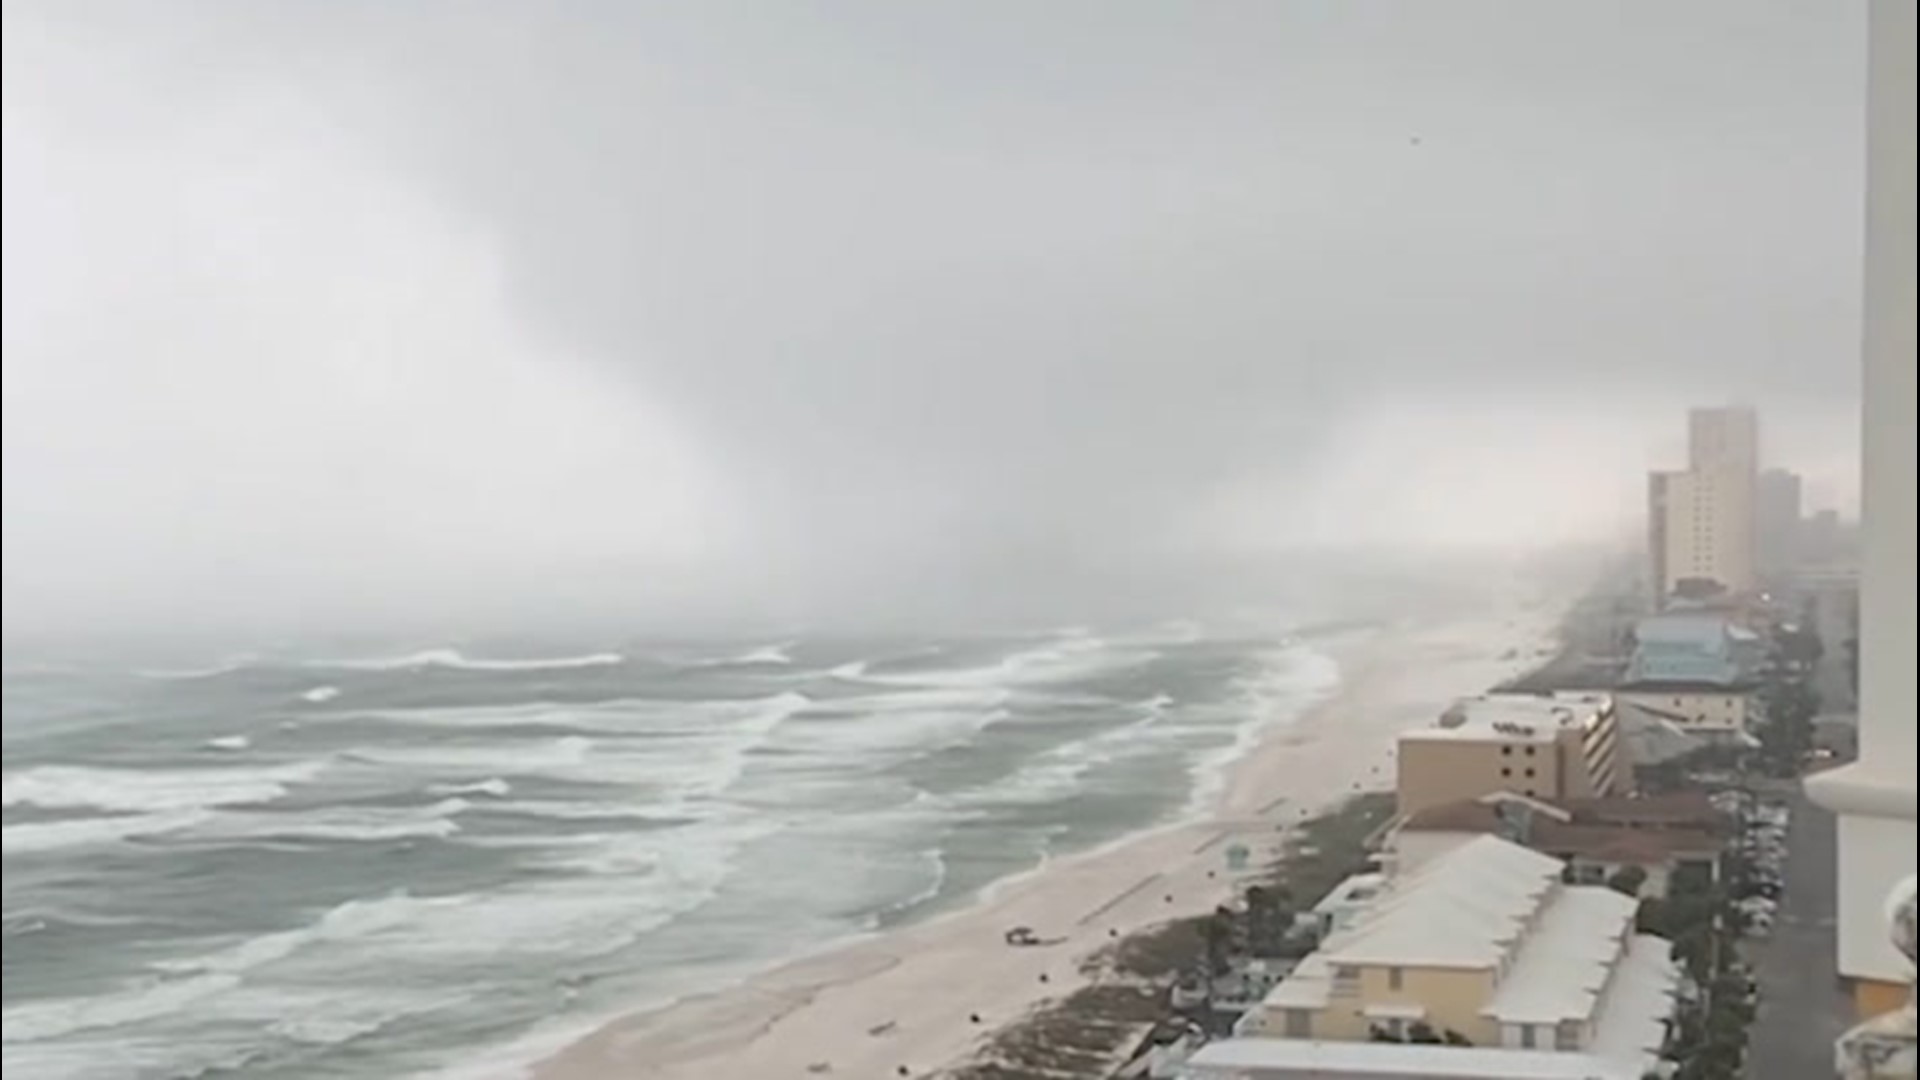 A few possible waterspouts were reported near Panama City Beach, Florida, on April 10, after tornado warnings were issued in the area.